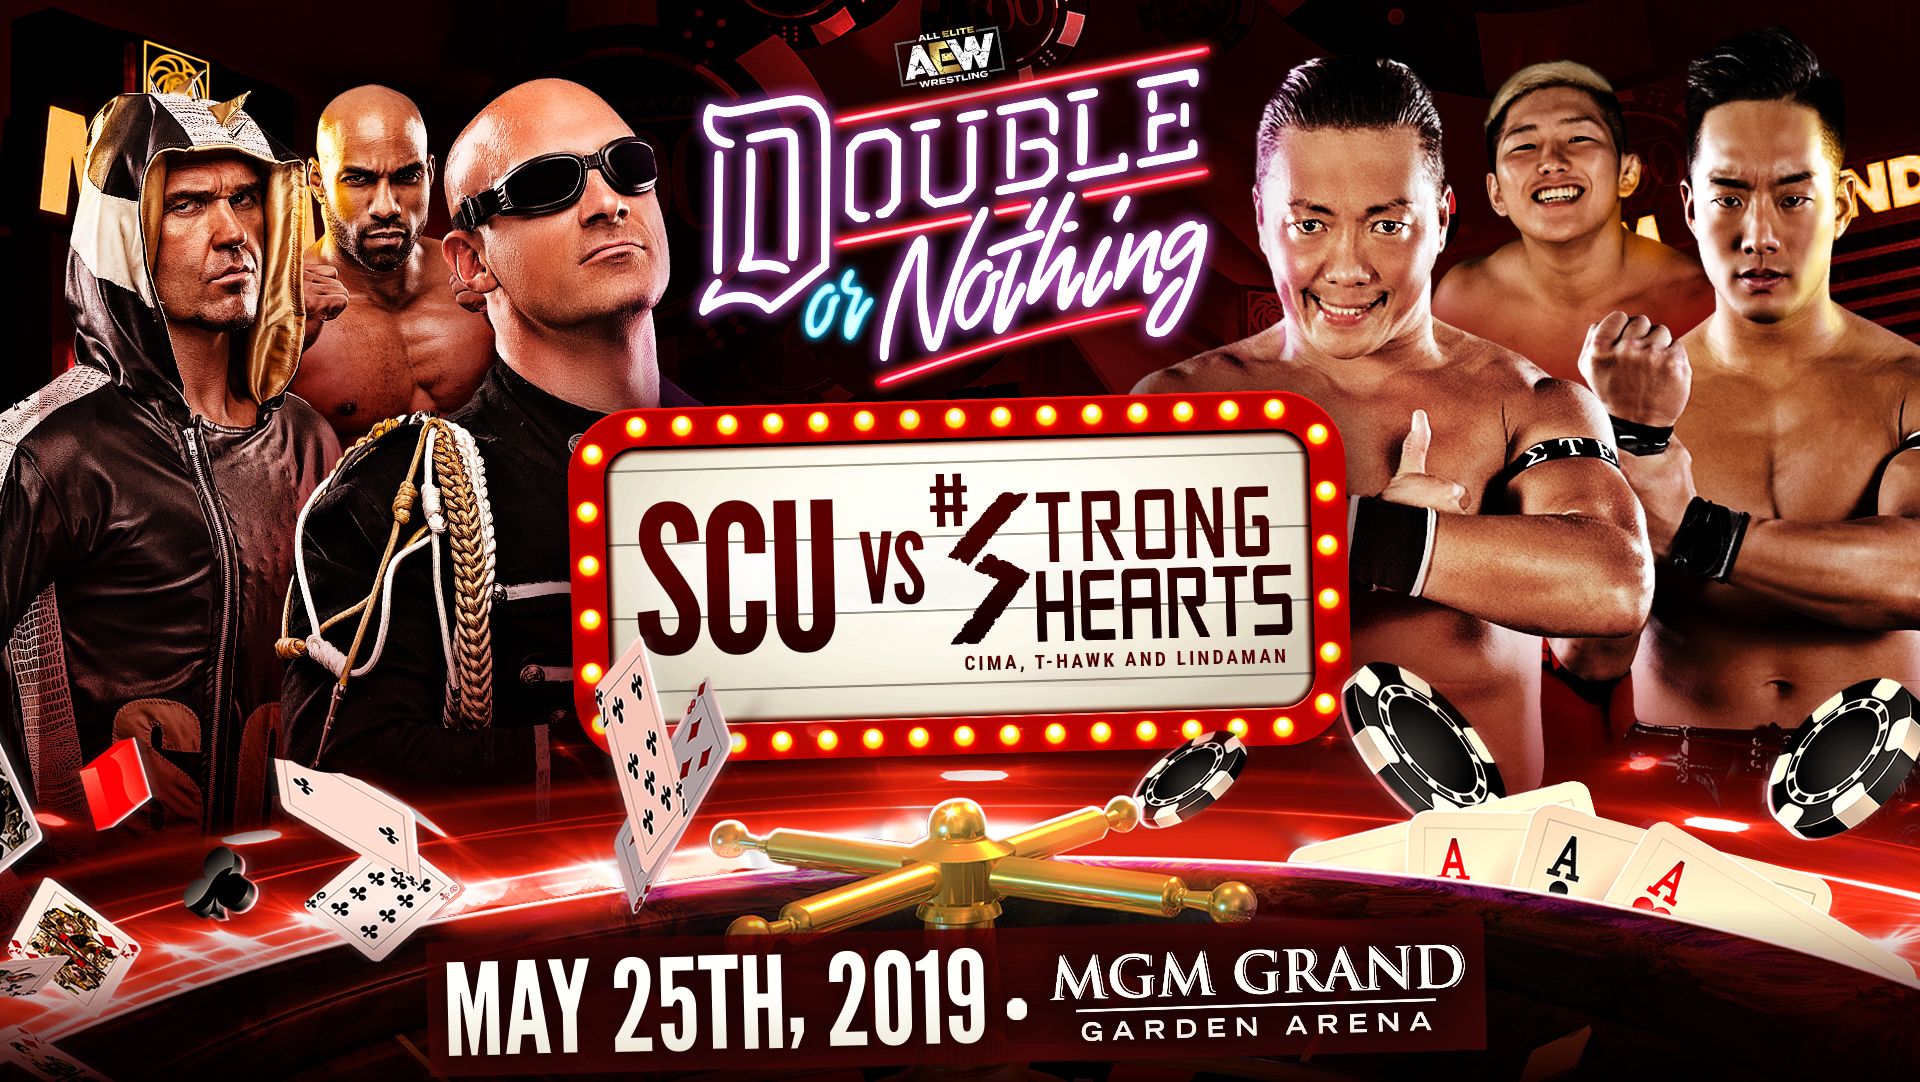 More Details on the Backstage Roles at AEW's "Double or Nothing" PPV